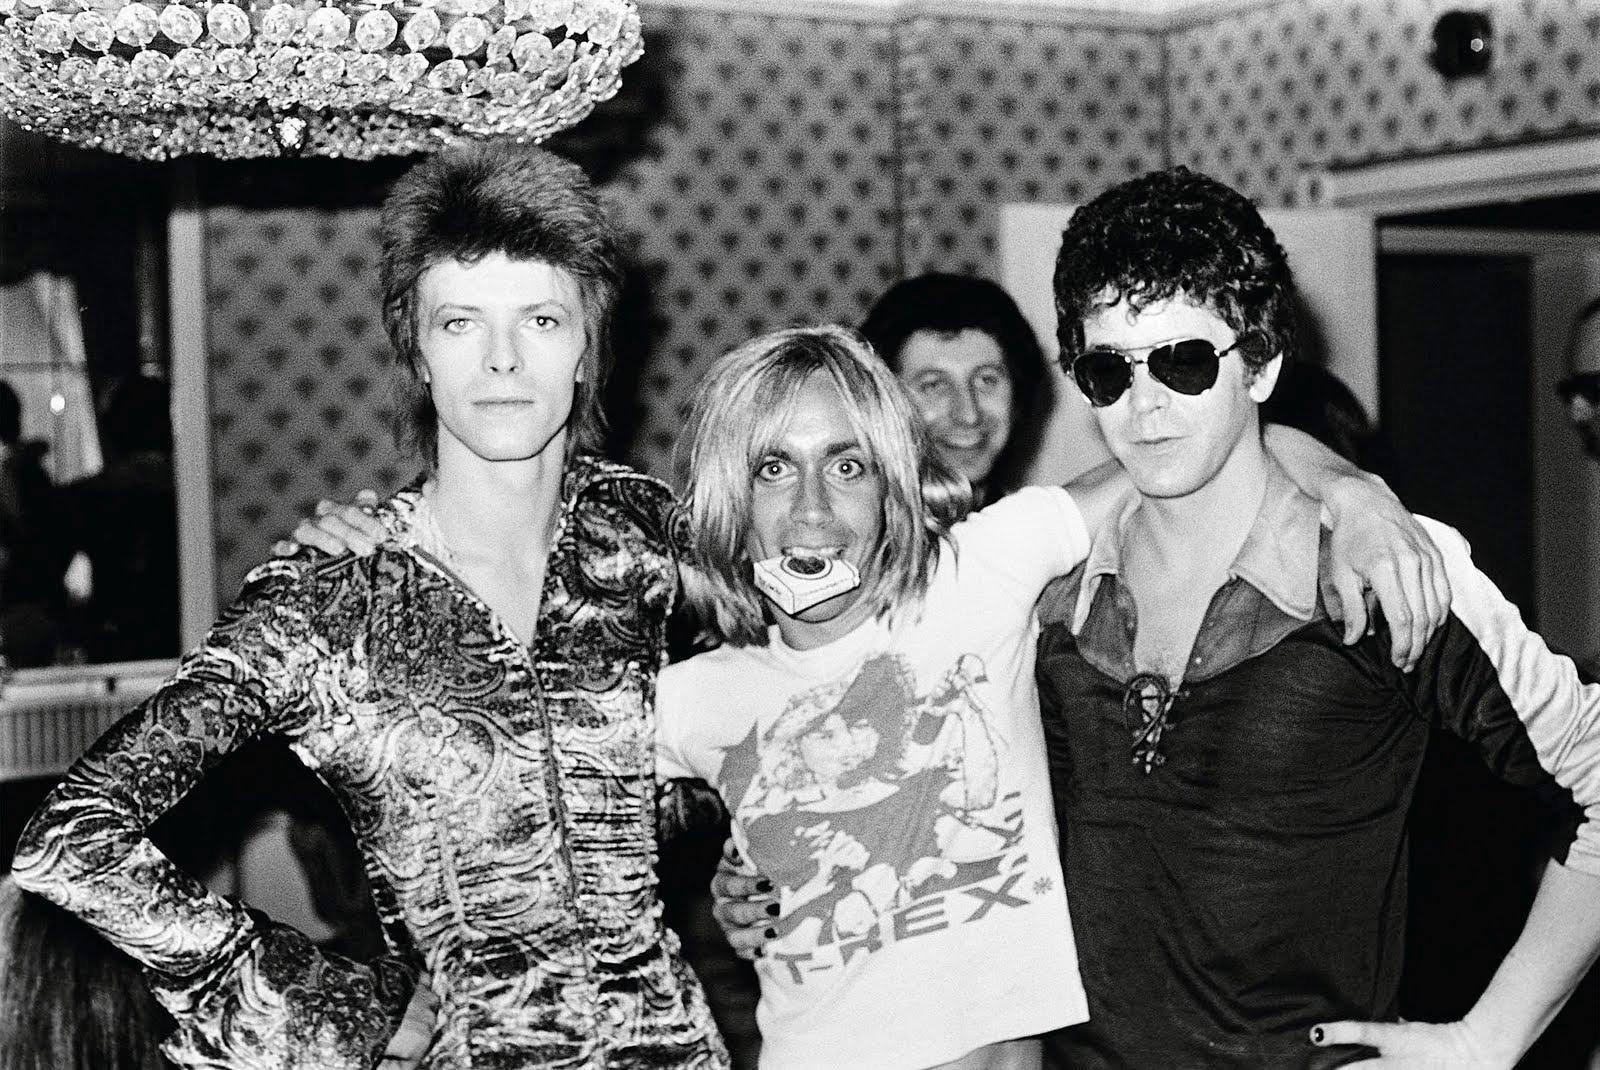 David Bowie, Iggy Pop & Lou Reed, London's Dorchester Hotel, 1972 by Mick Rock

Edition: 29/50
Signed and numbered by Mick Rock. 
Medium: Silver gelatin limited edition photographic print on paper
Size framed: 27" x 33" inch 

"It was a press